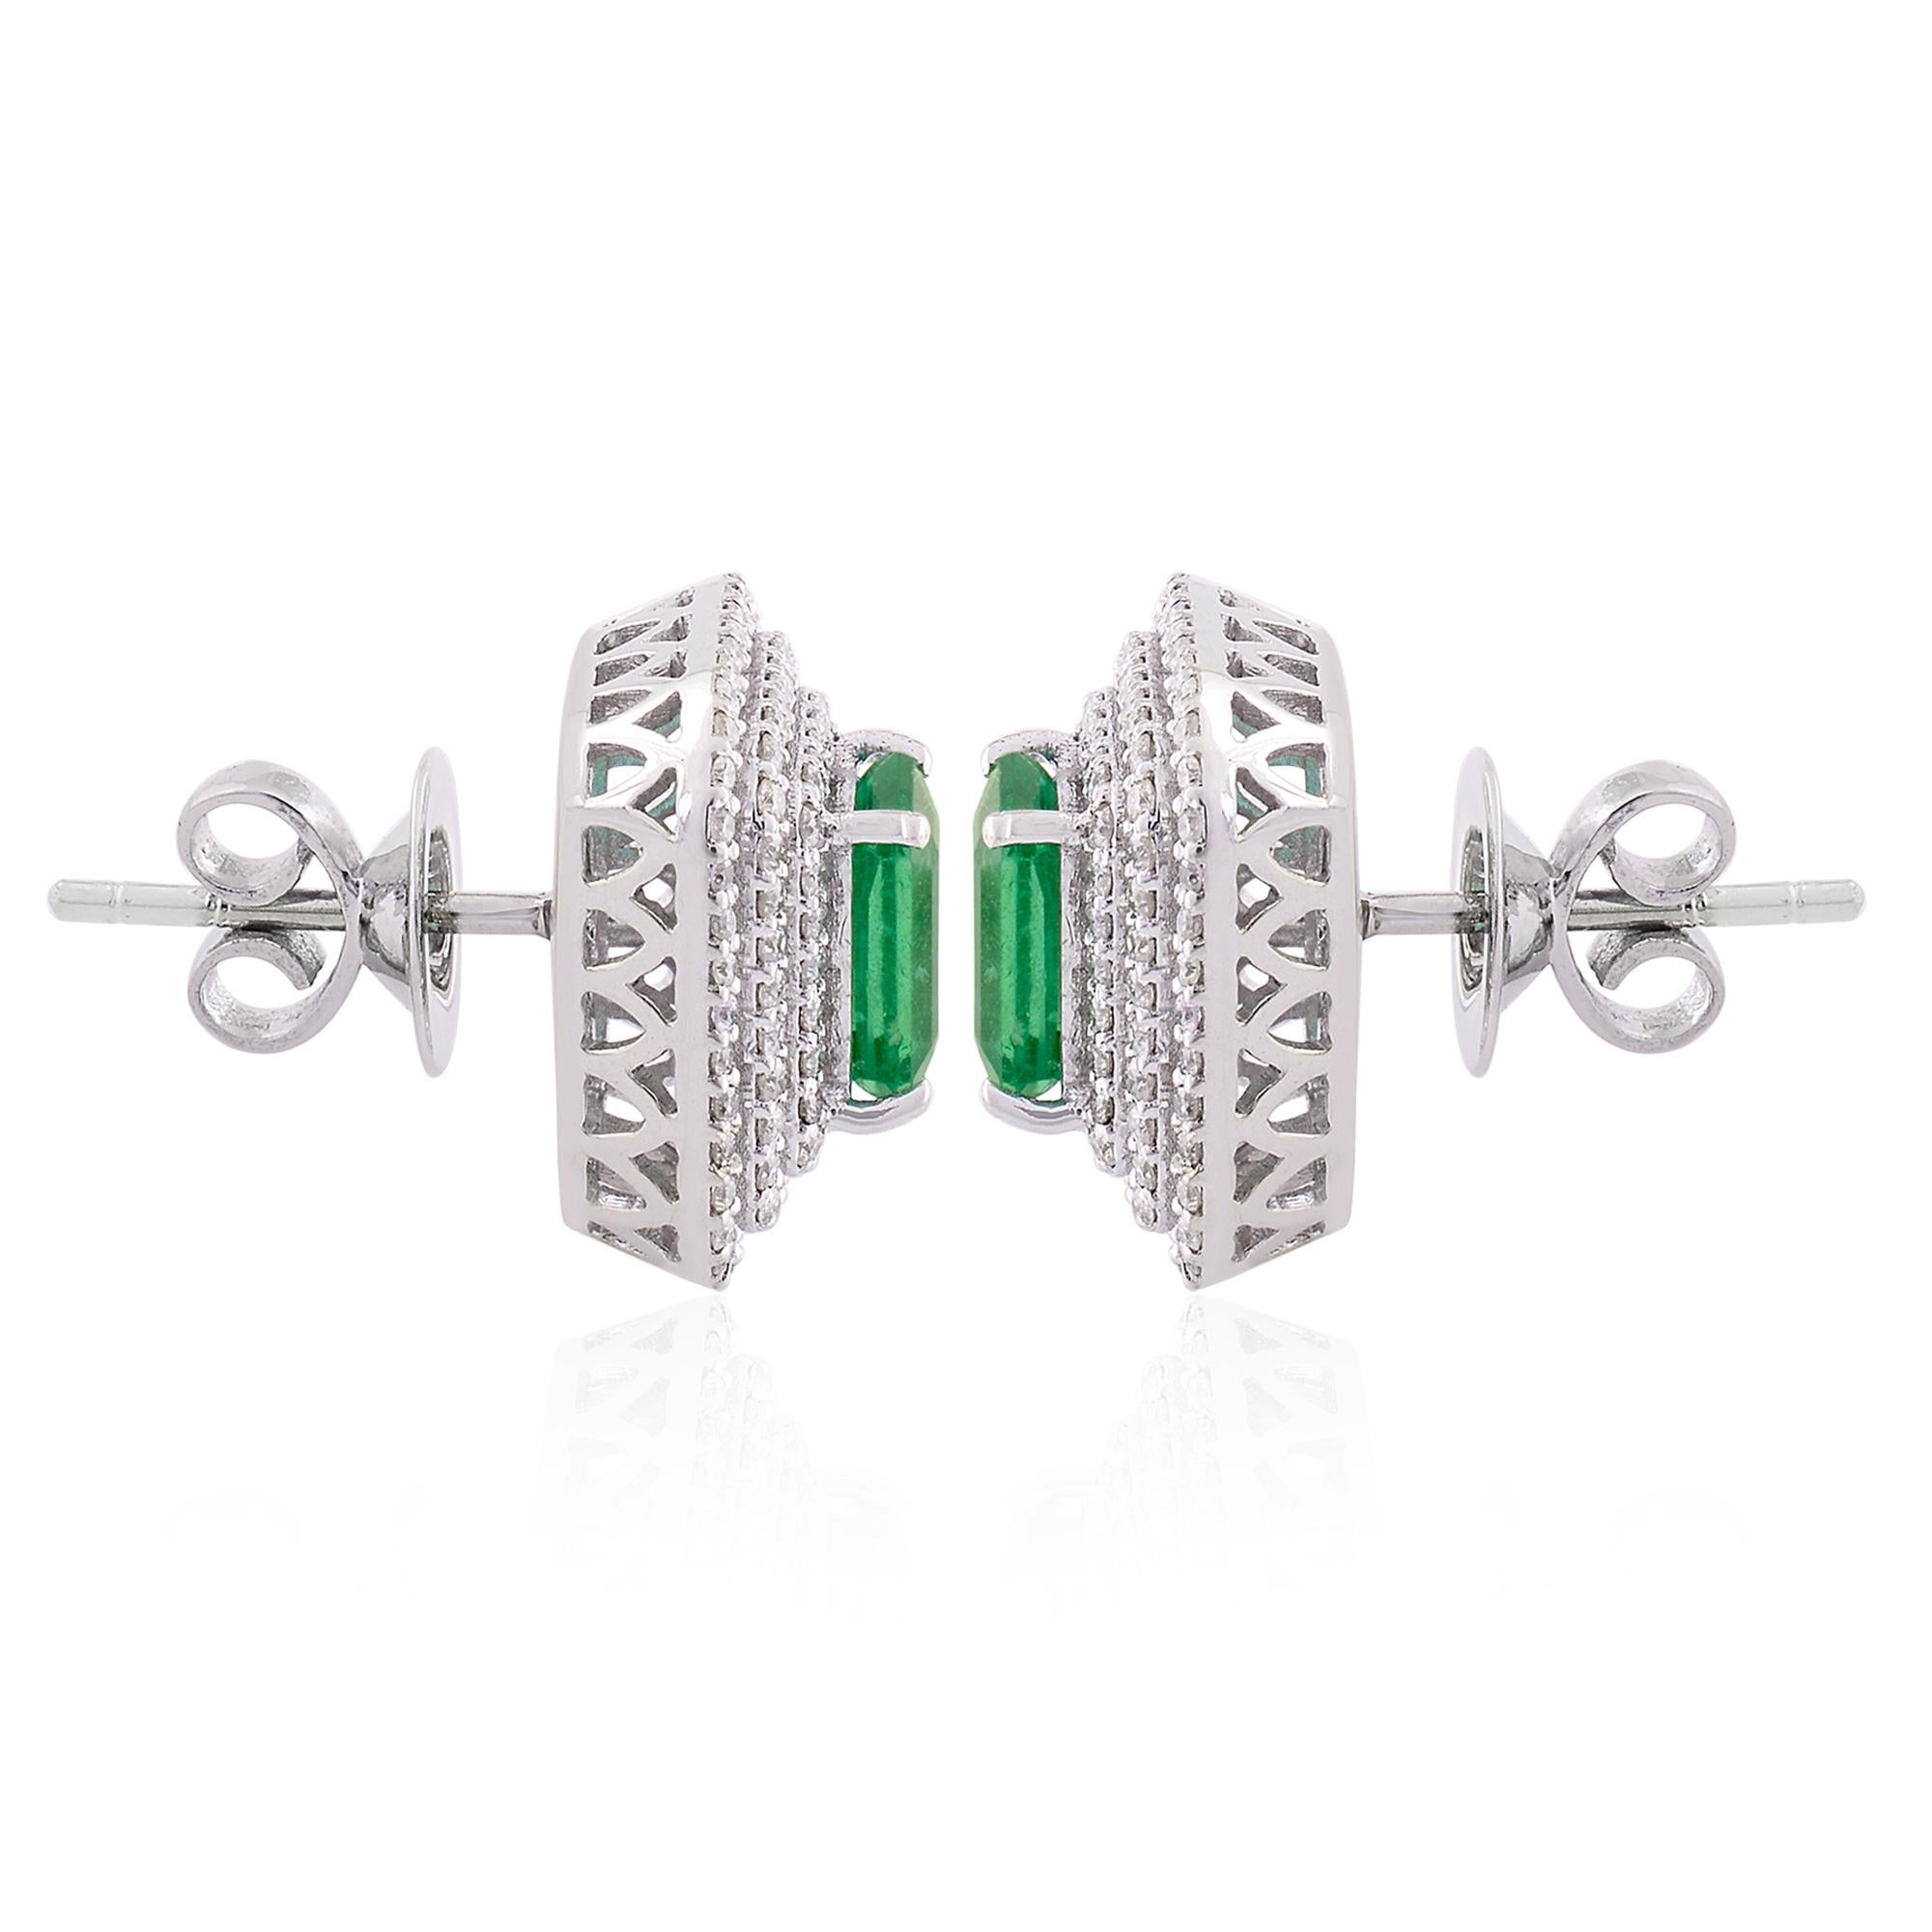 Women's Natural Emerald Gemstone Stud Earrings Diamond Pave Solid 18k White Gold Jewelry For Sale